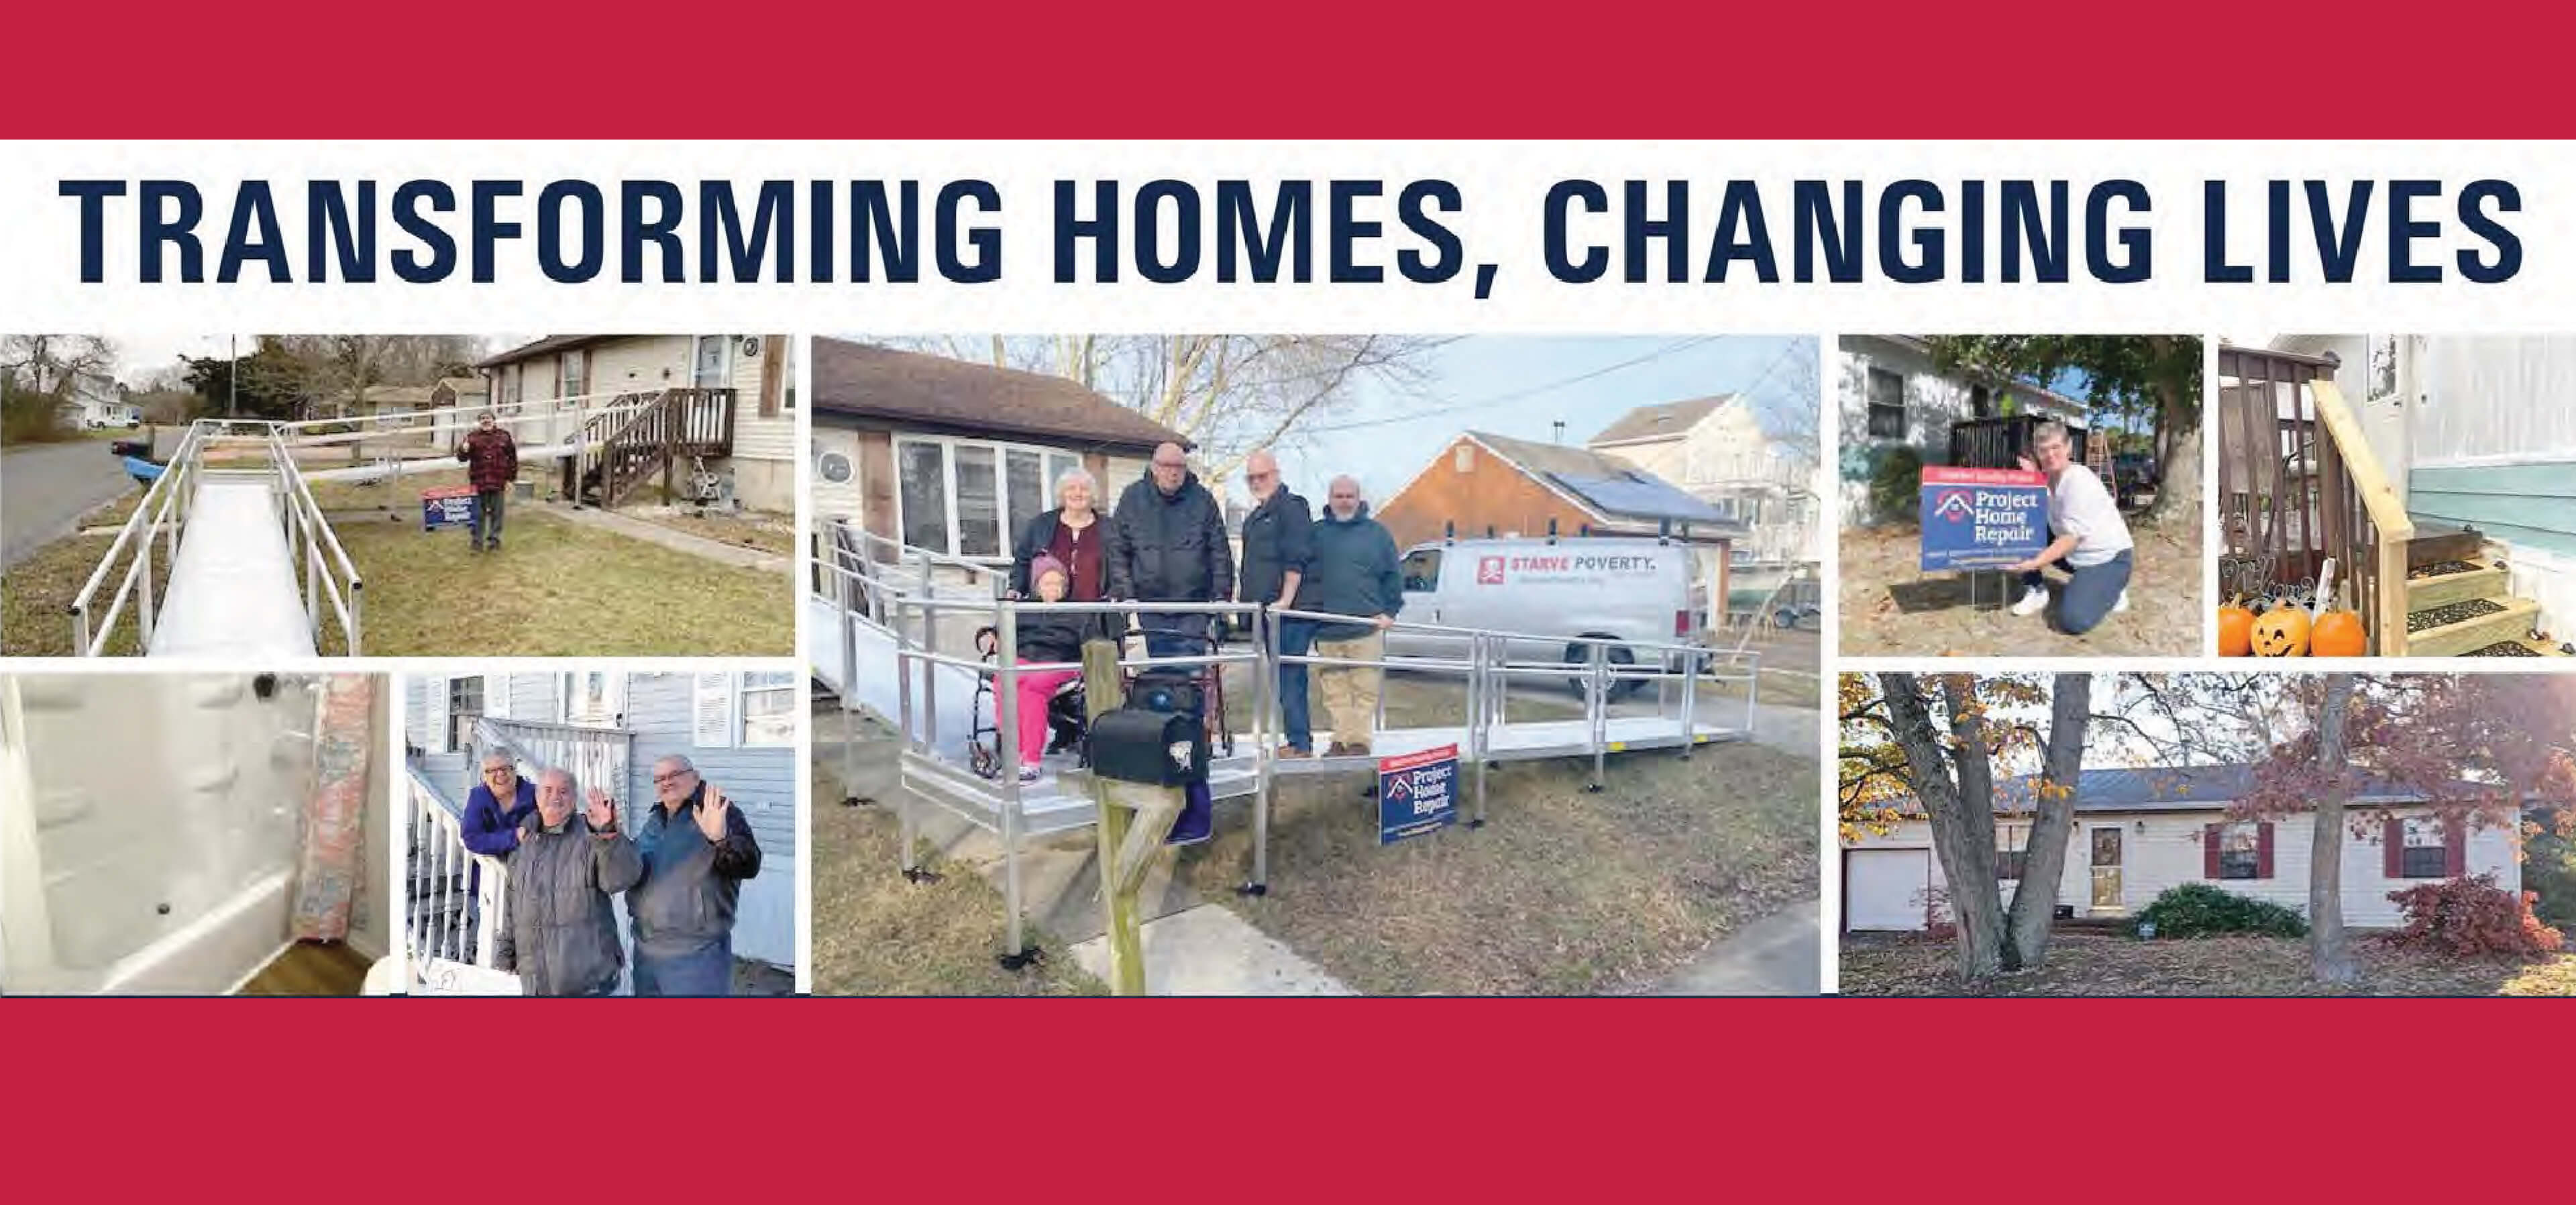 Transforming Homes, Changing Lives